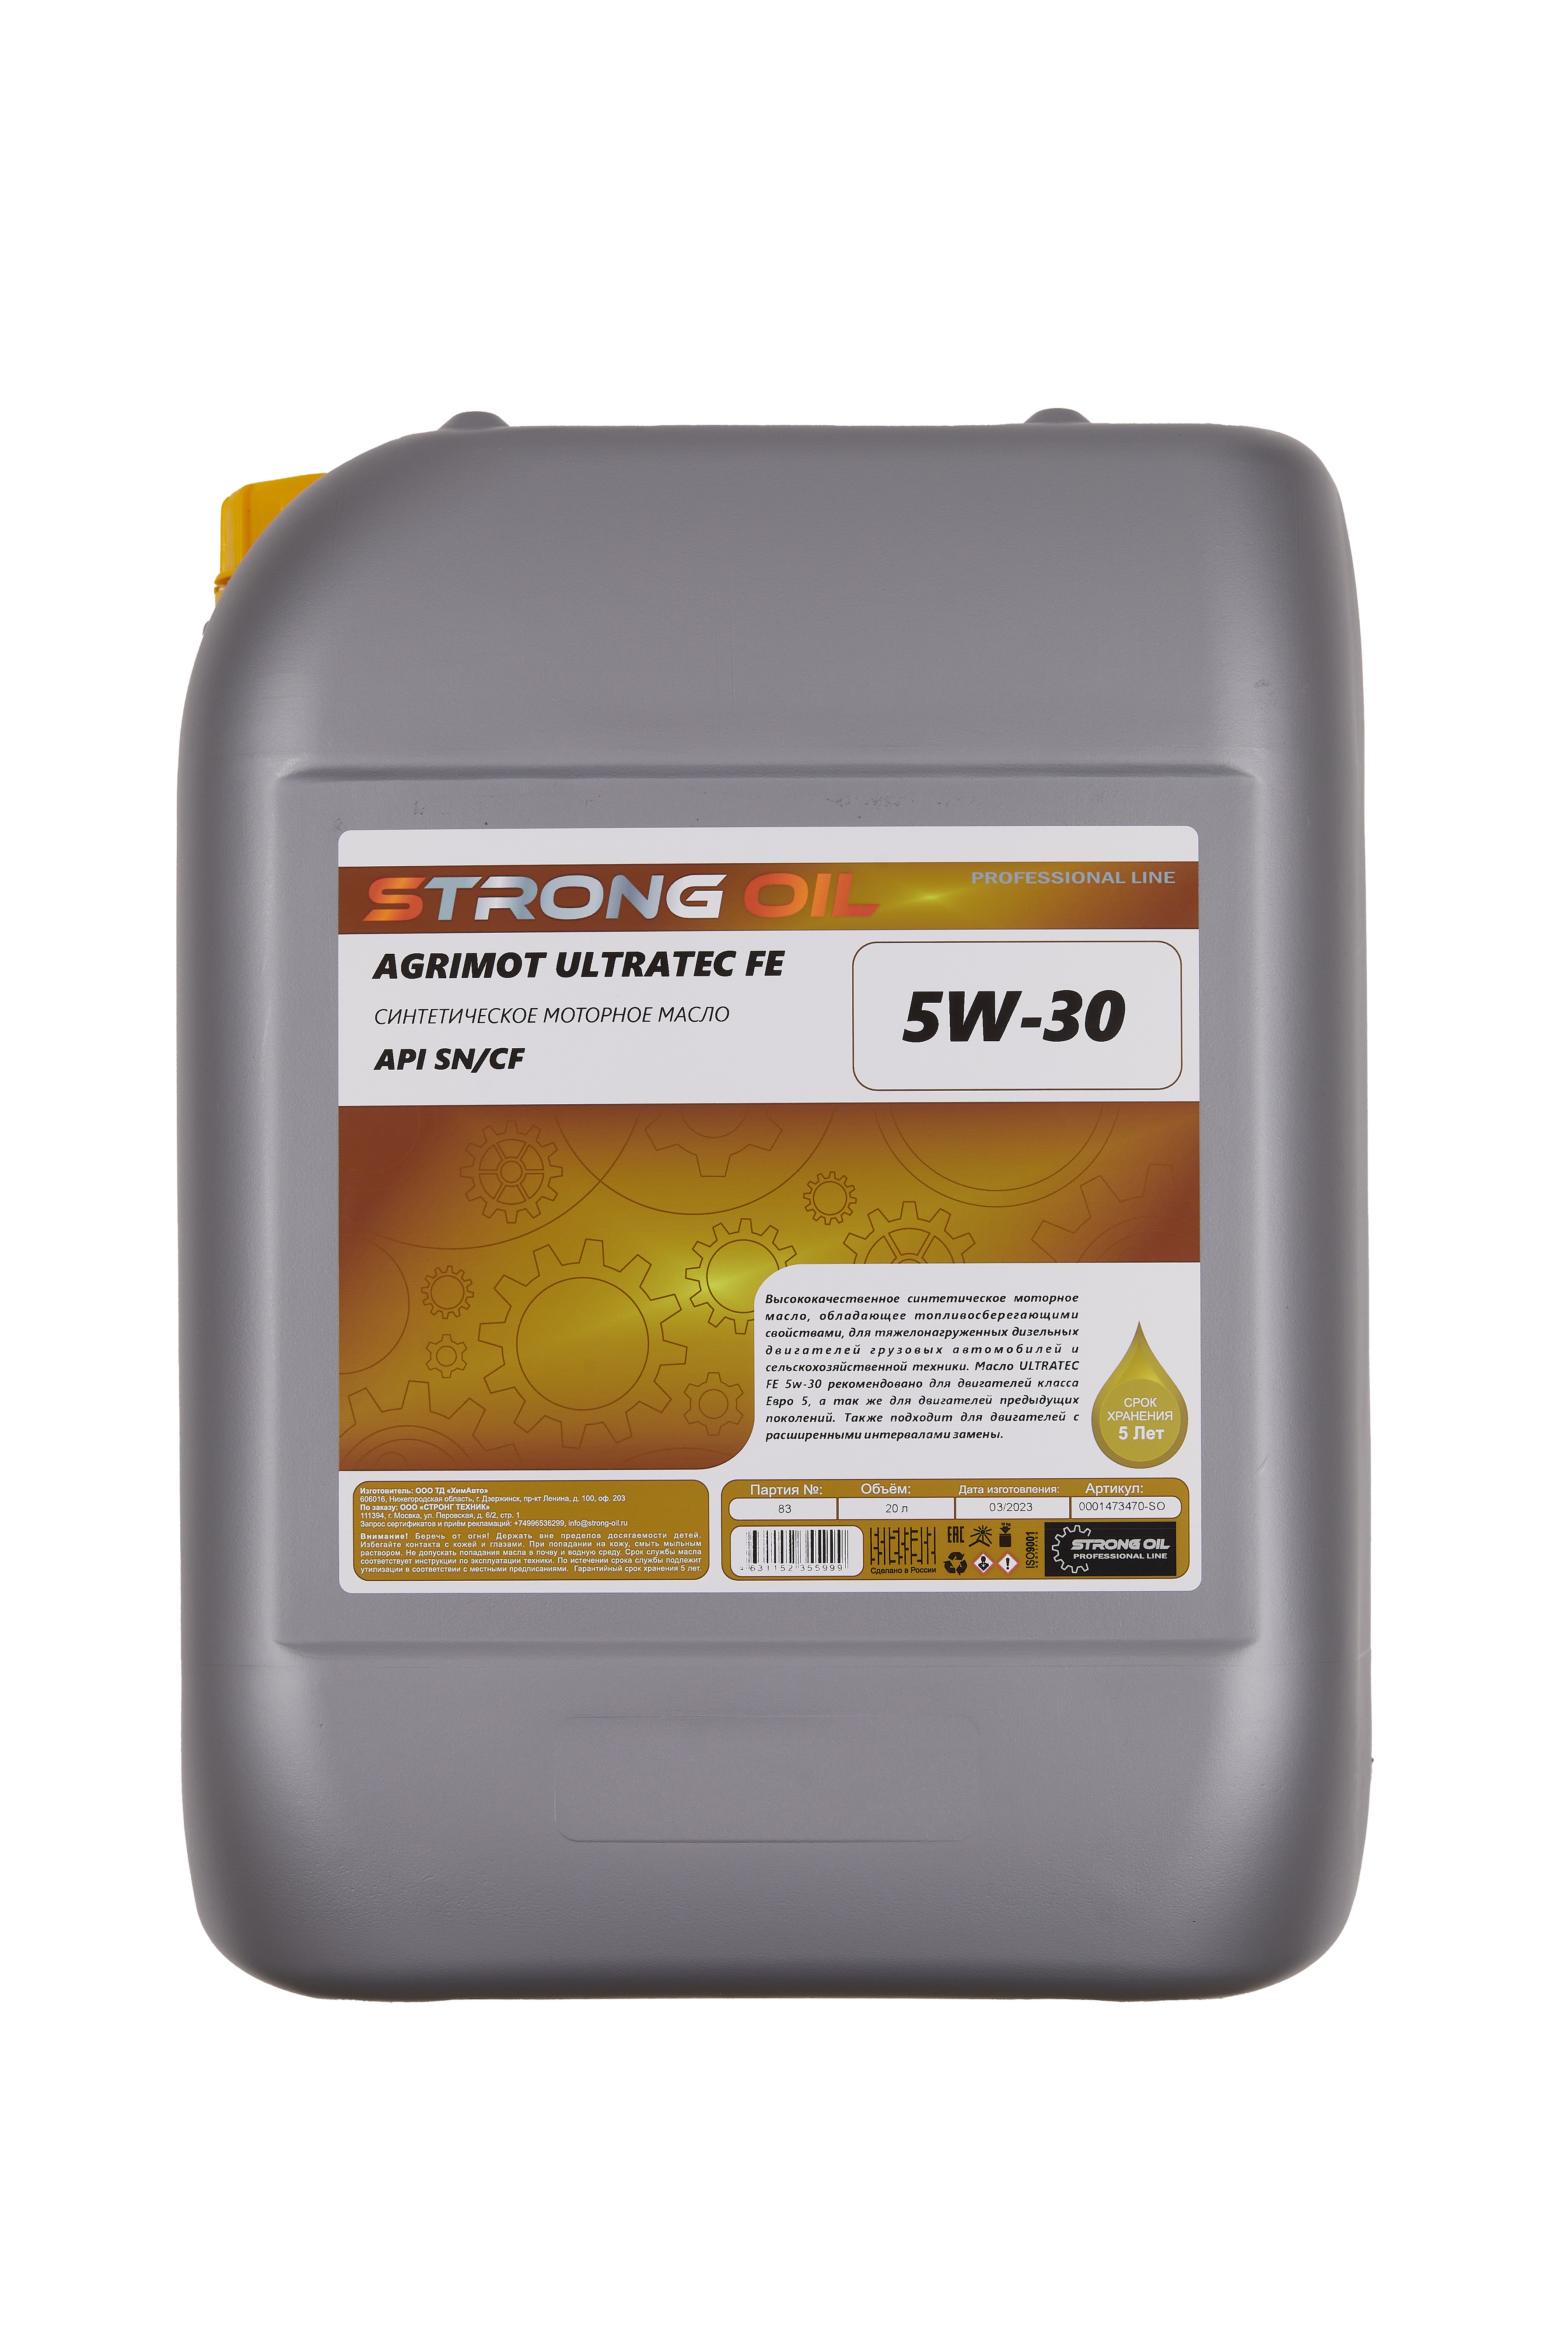 Масло моторное Agrimot Ultratec 5W-30 STRONG OIL